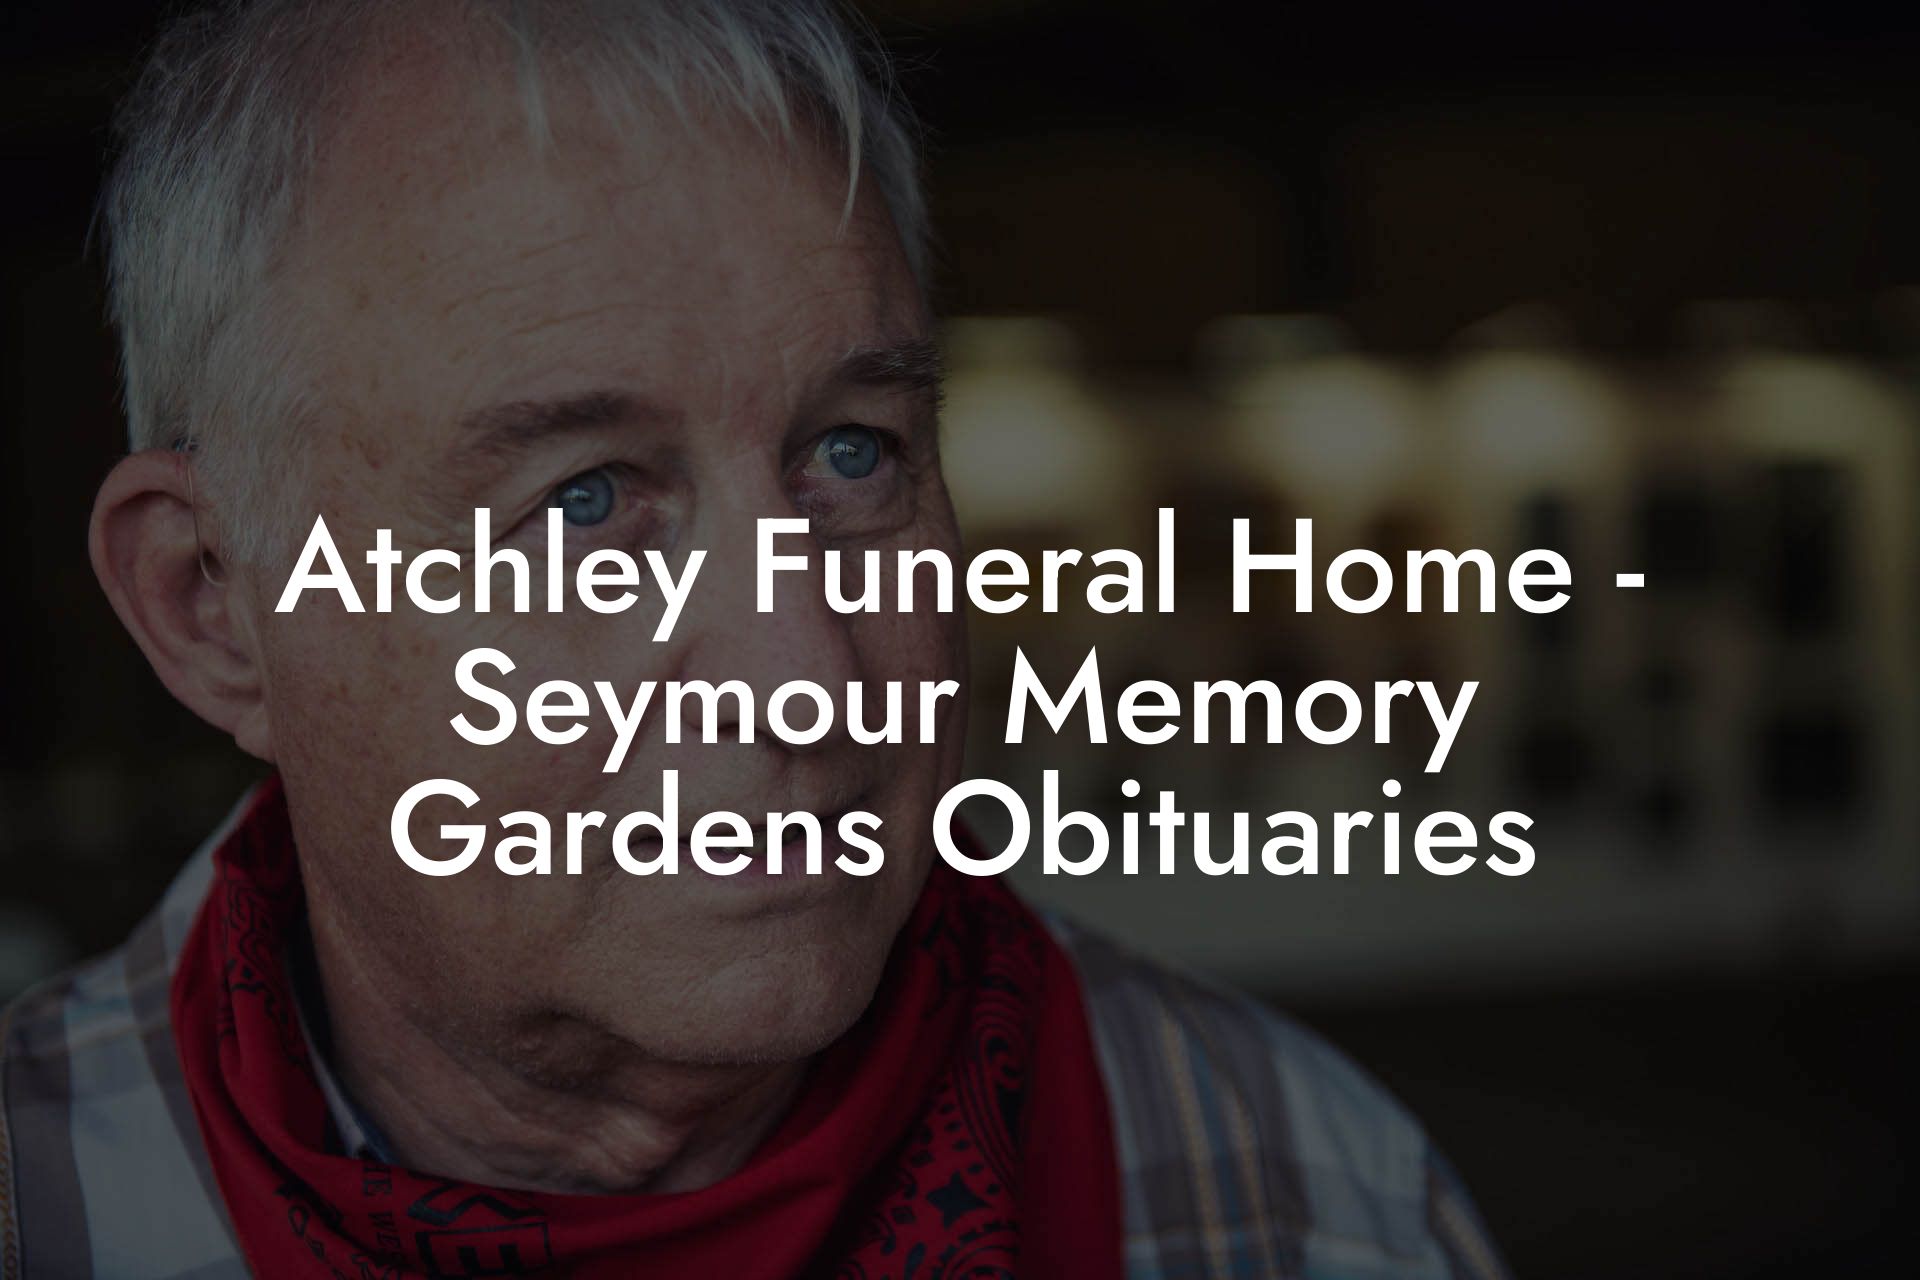 Atchley Funeral Home - Seymour Memory Gardens Obituaries